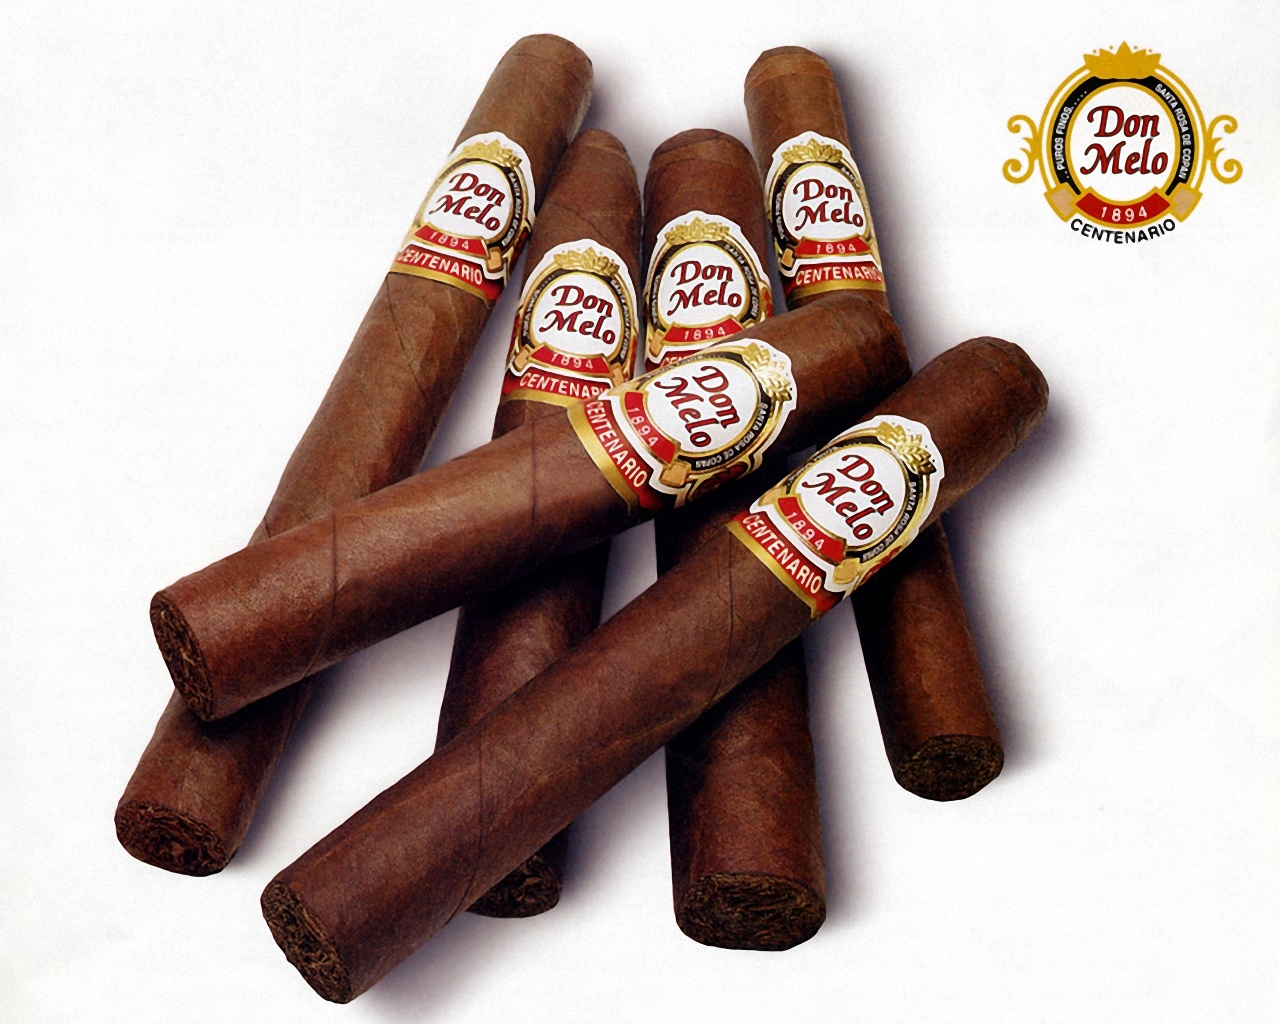 Cuban Cigars 1280x1024 Wallpapers 1280x1024 Wallpapers Pictures 1280x1024